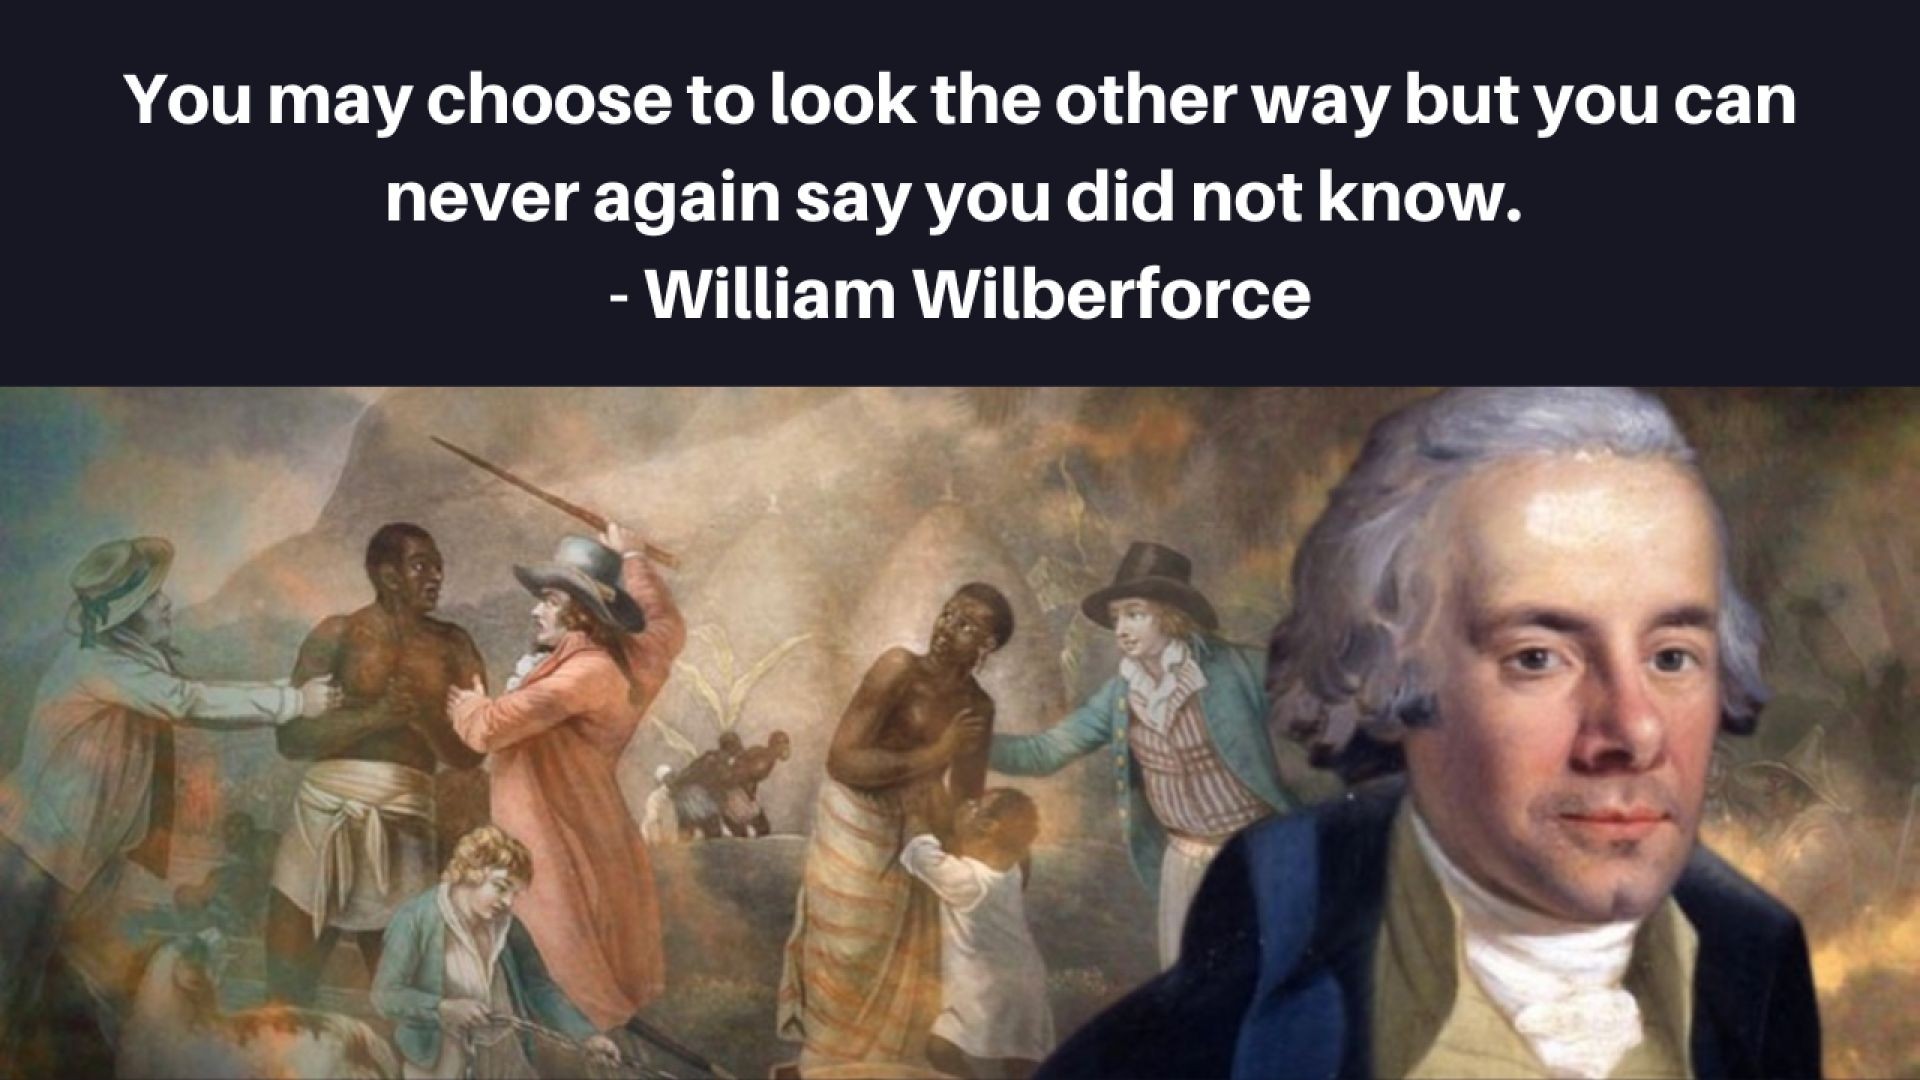 William Wilberforce | The Man Who Abolished the Slave Trade - Everyone Needs to Know His Story!